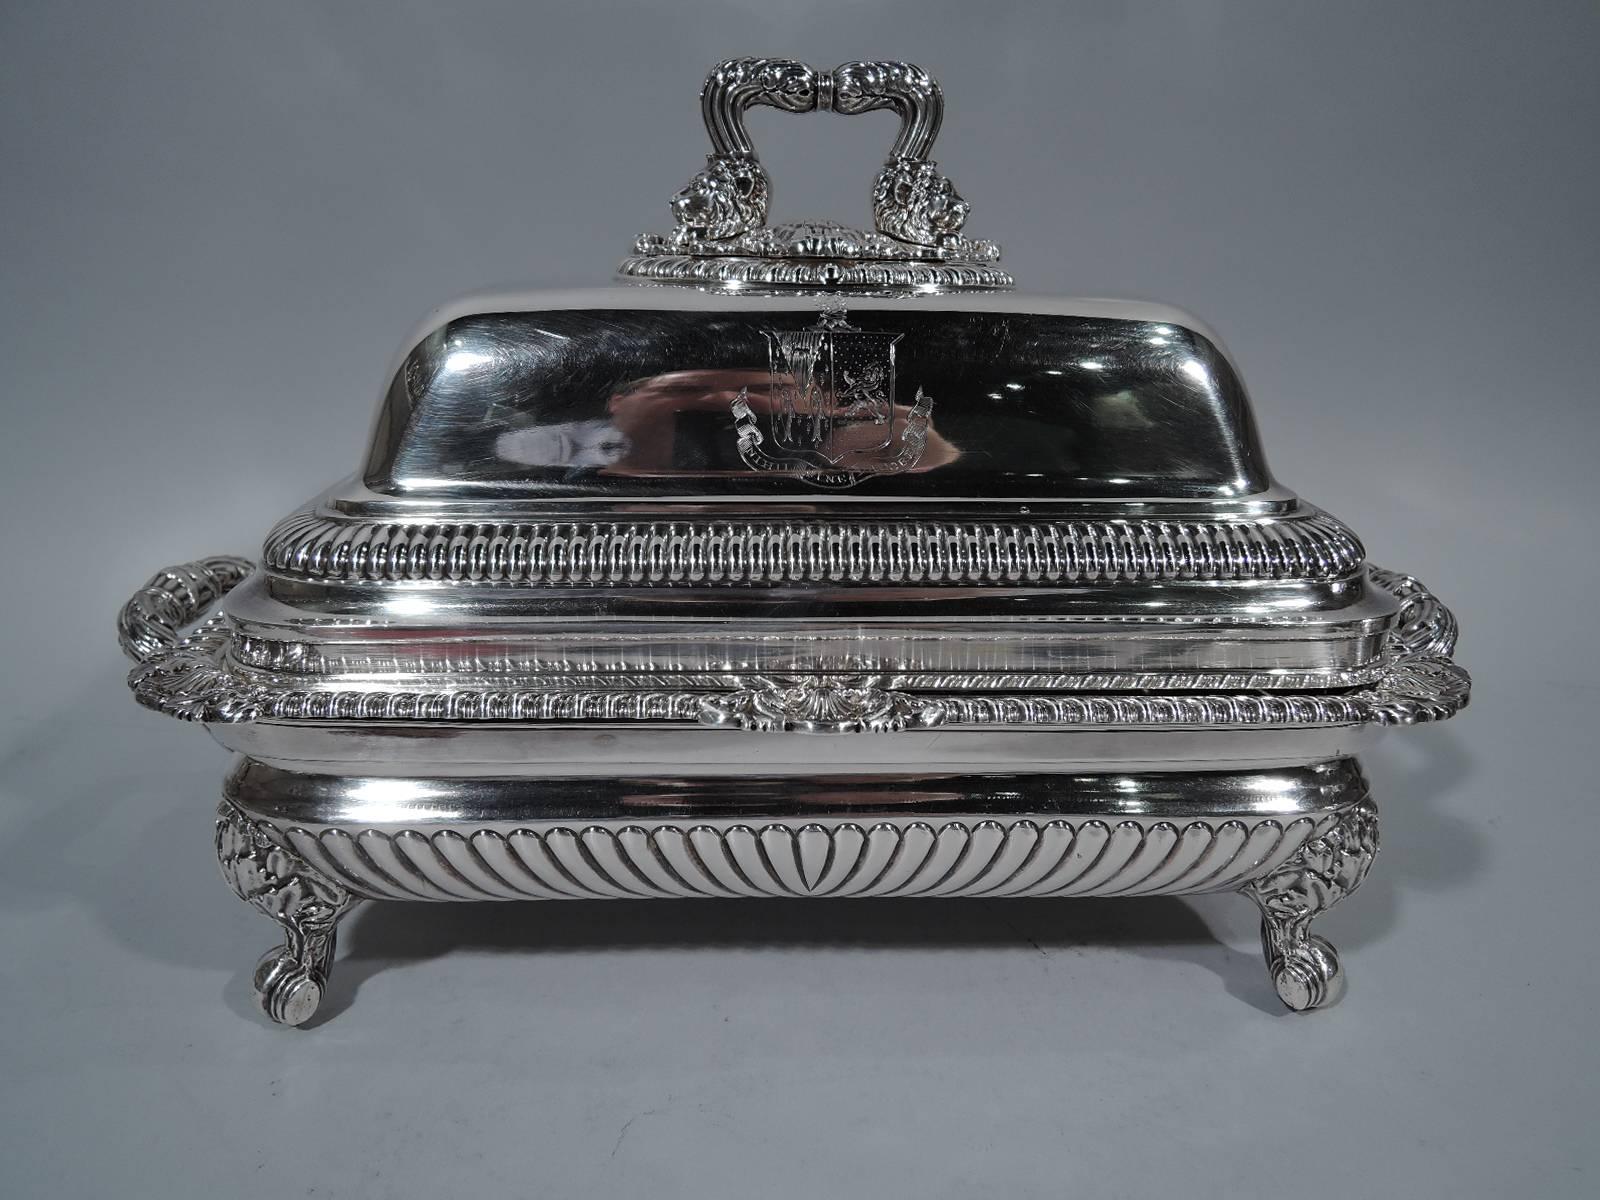 Early 19th Century Pair of English Regency Sterling Silver Covered Serving Dishes by Paul Storr